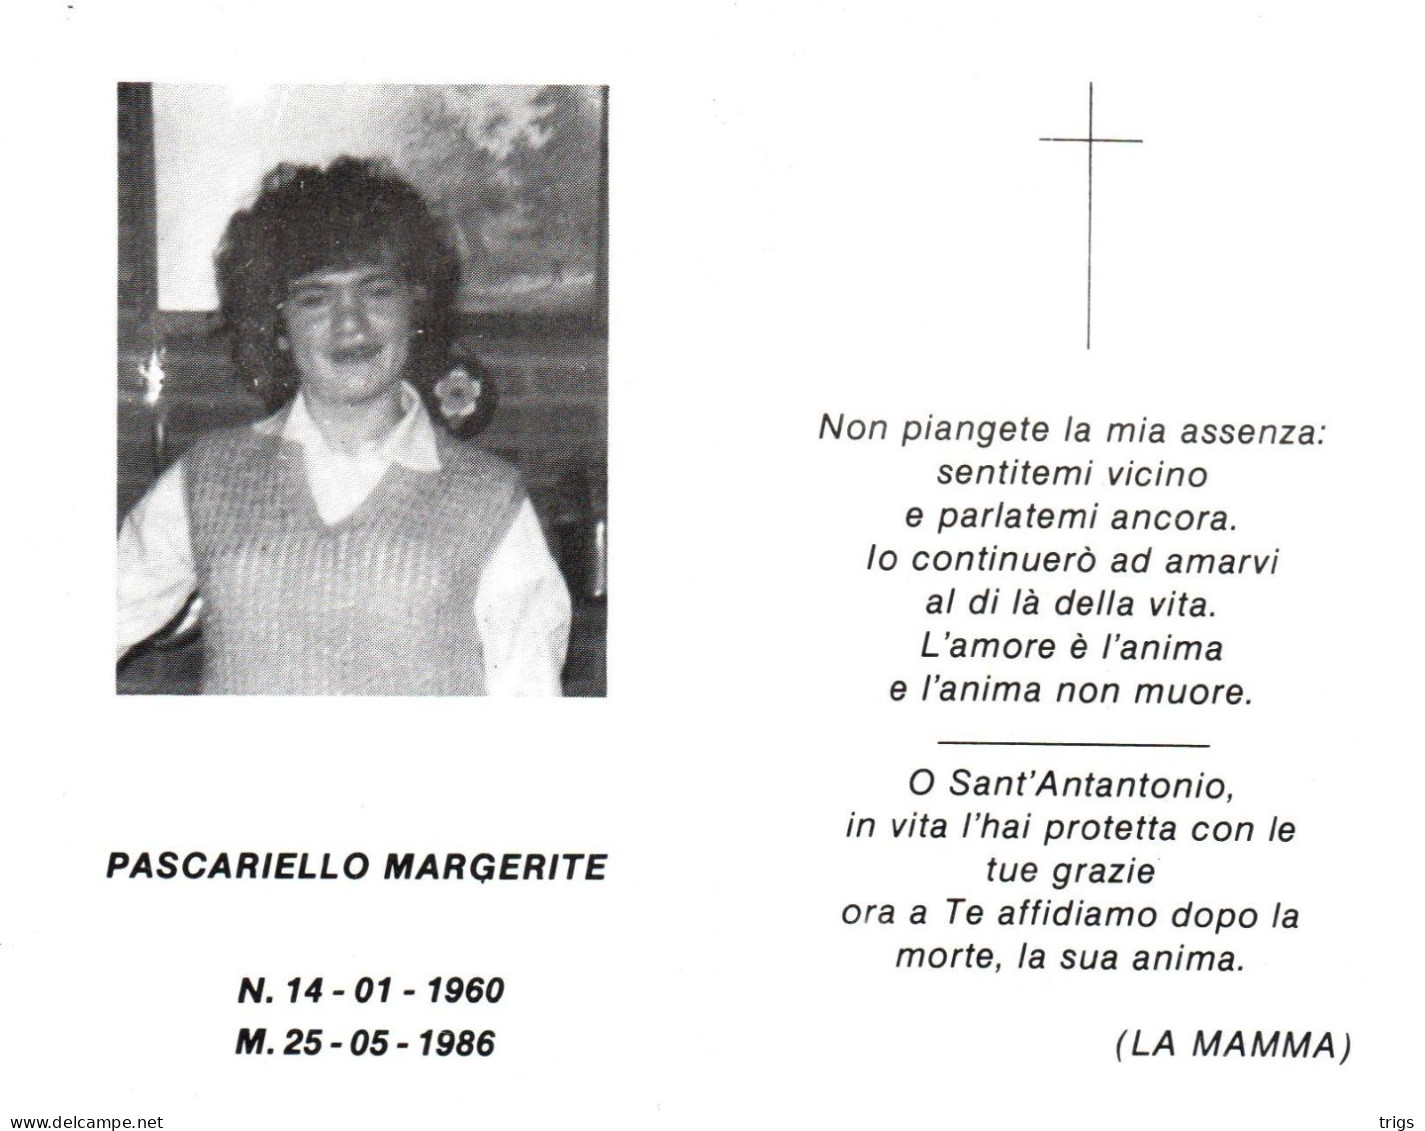 Margerite Pascariello (1960-1986) - Andachtsbilder